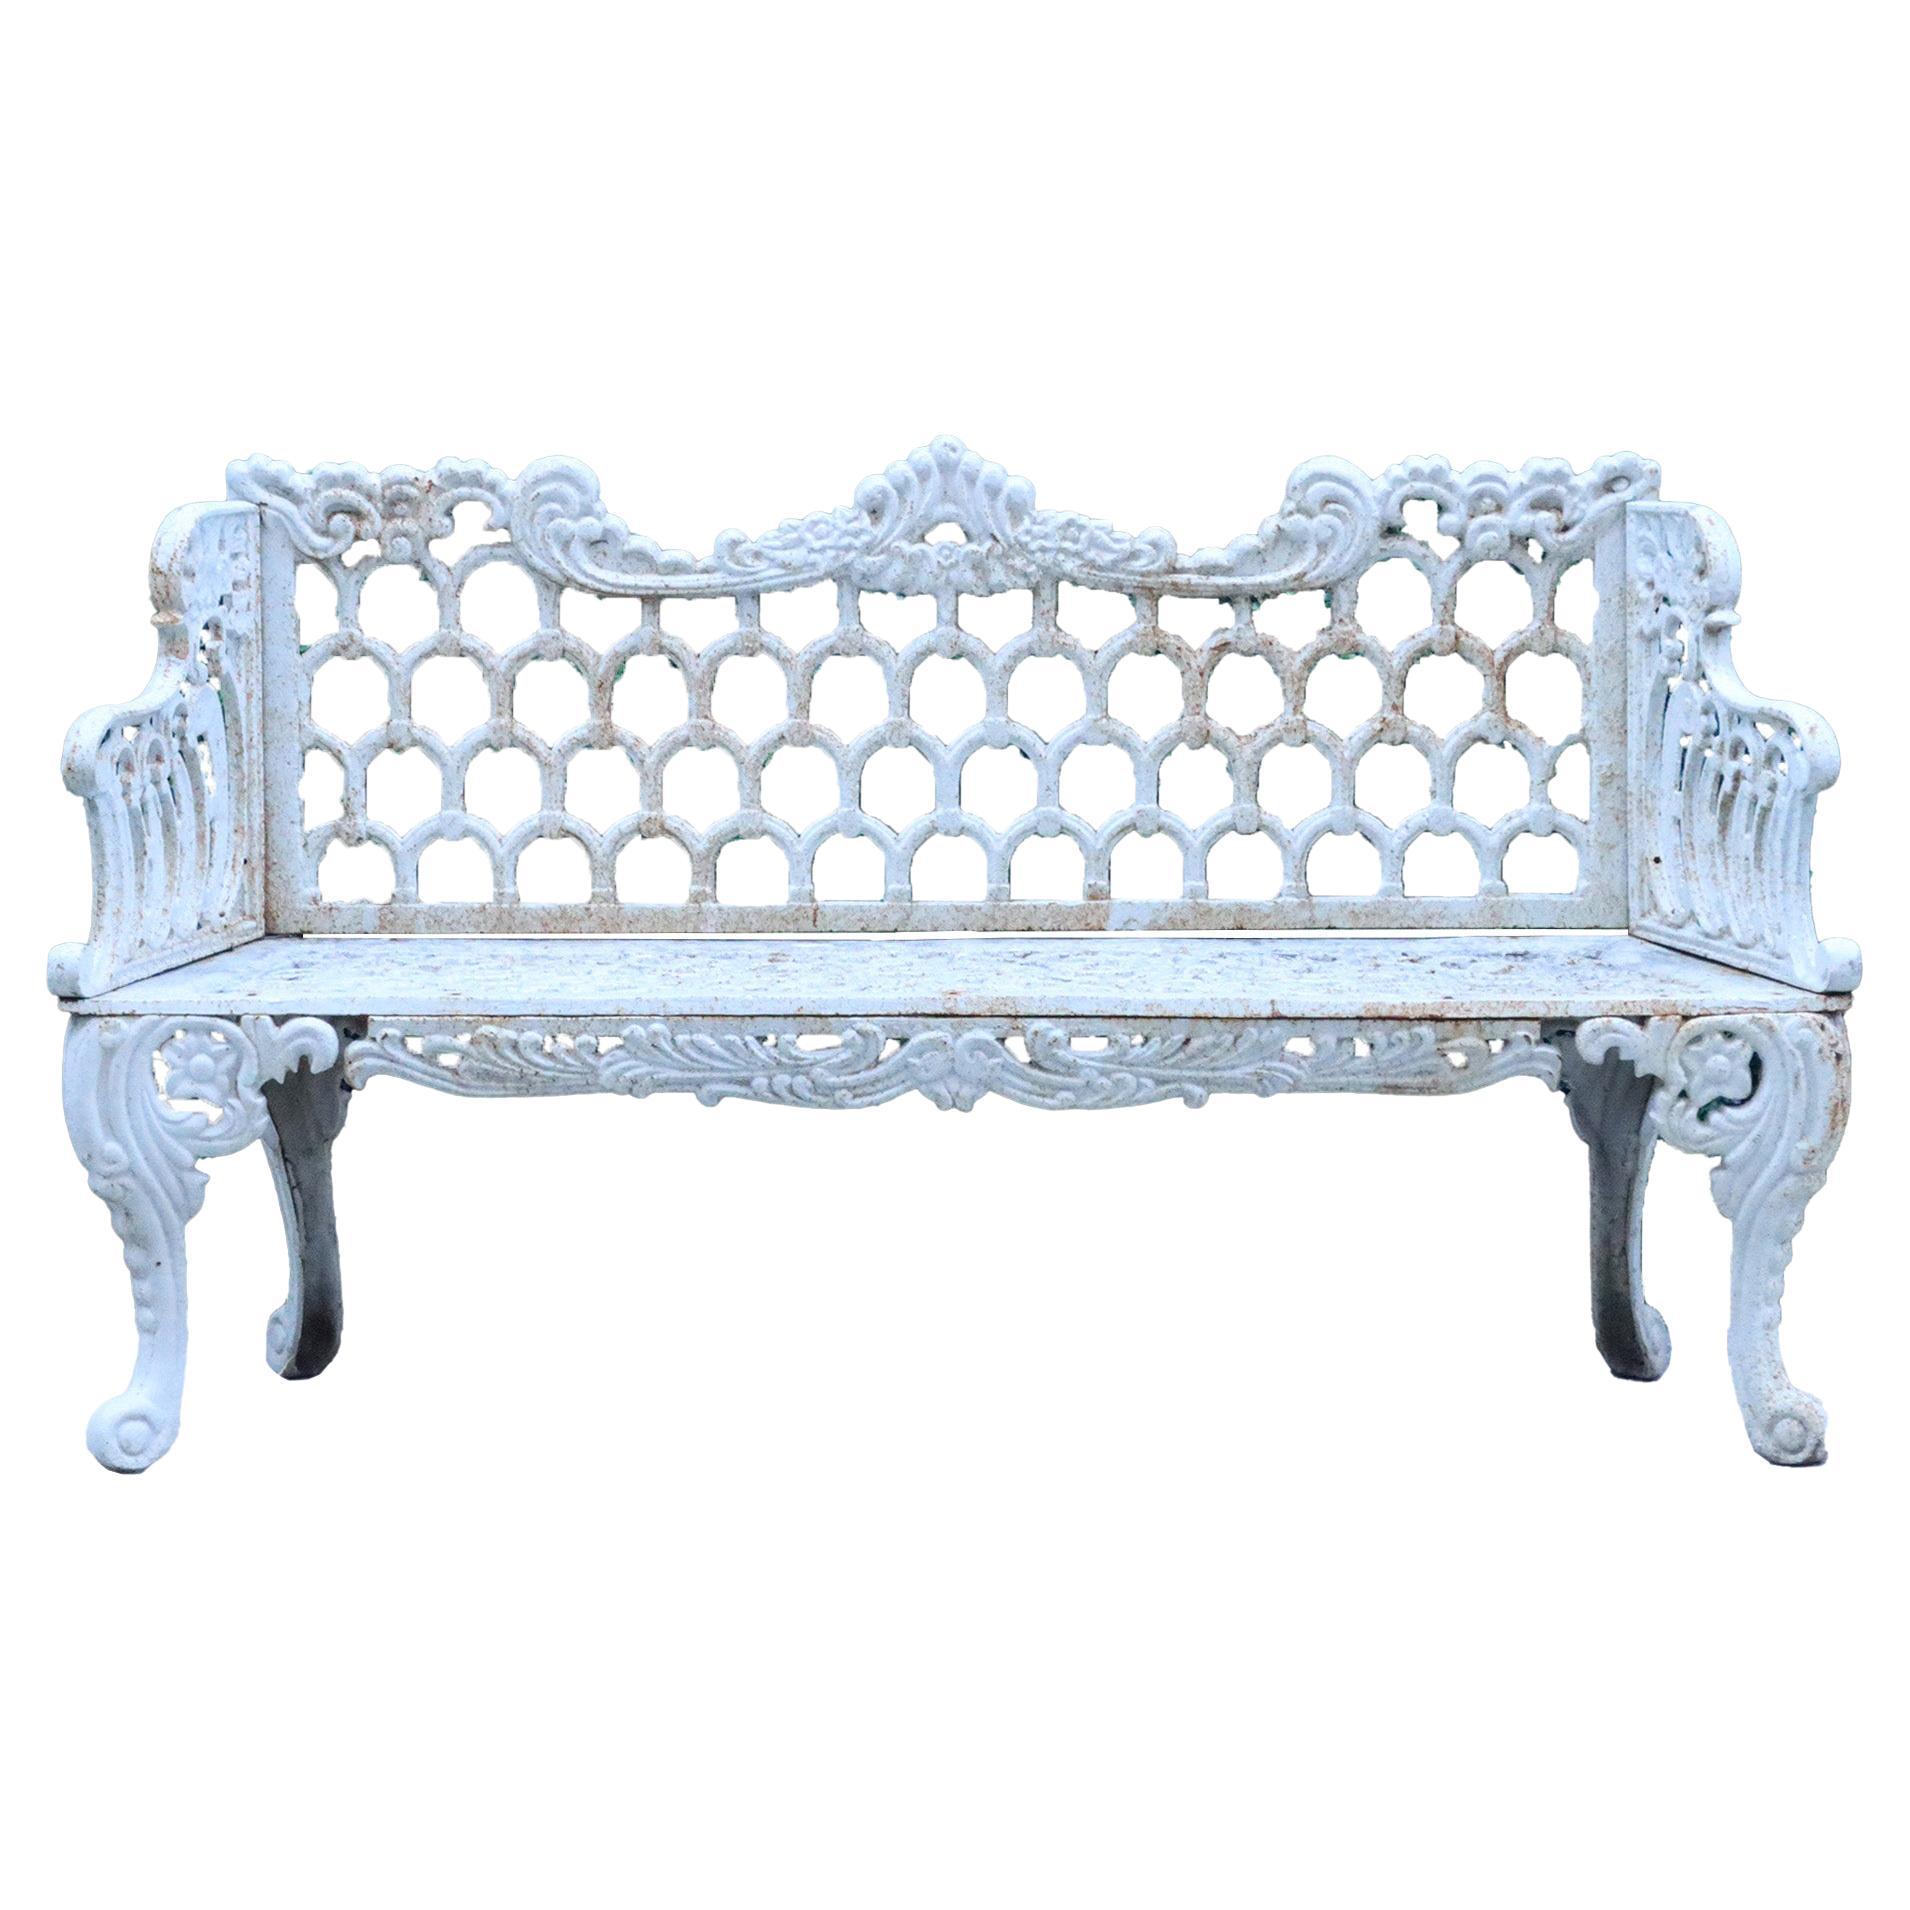 Contemporary White Painted Cast Iron Garden Bench